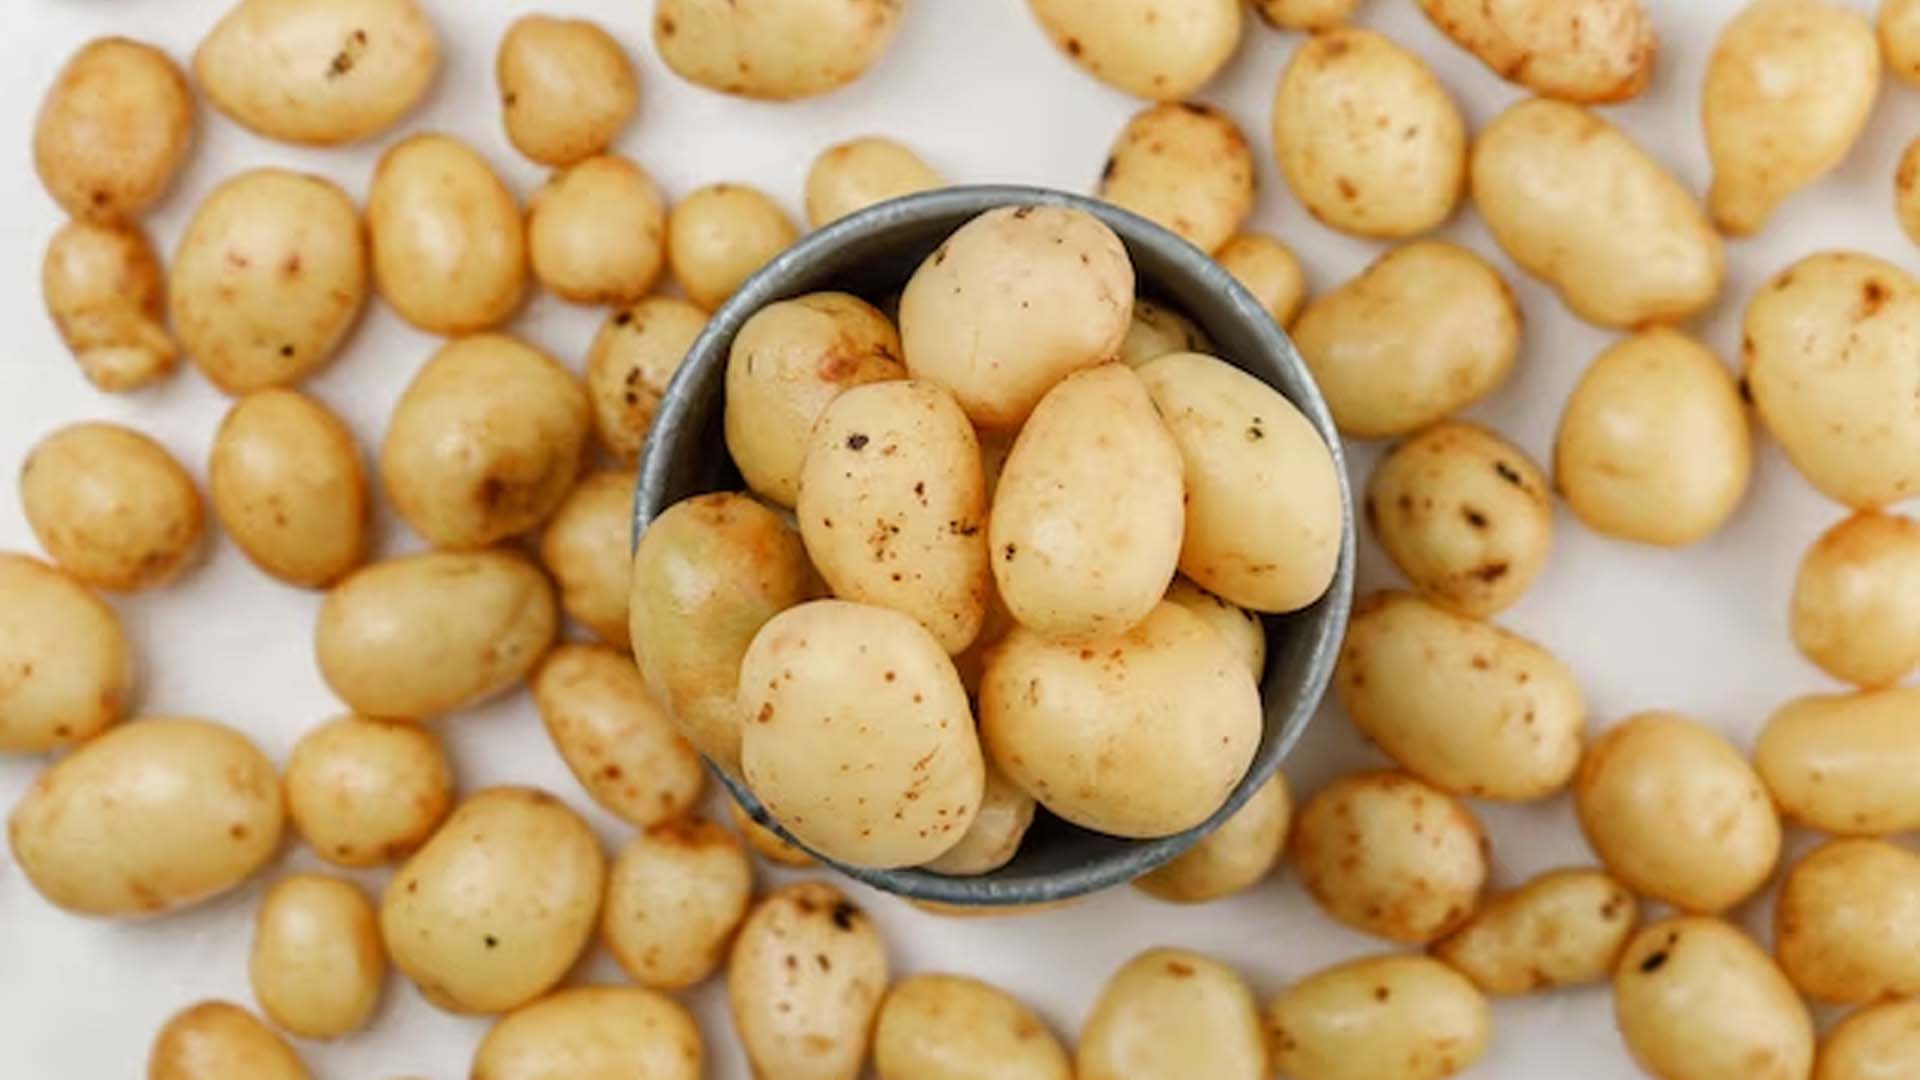 Nutrition Facts of Potato